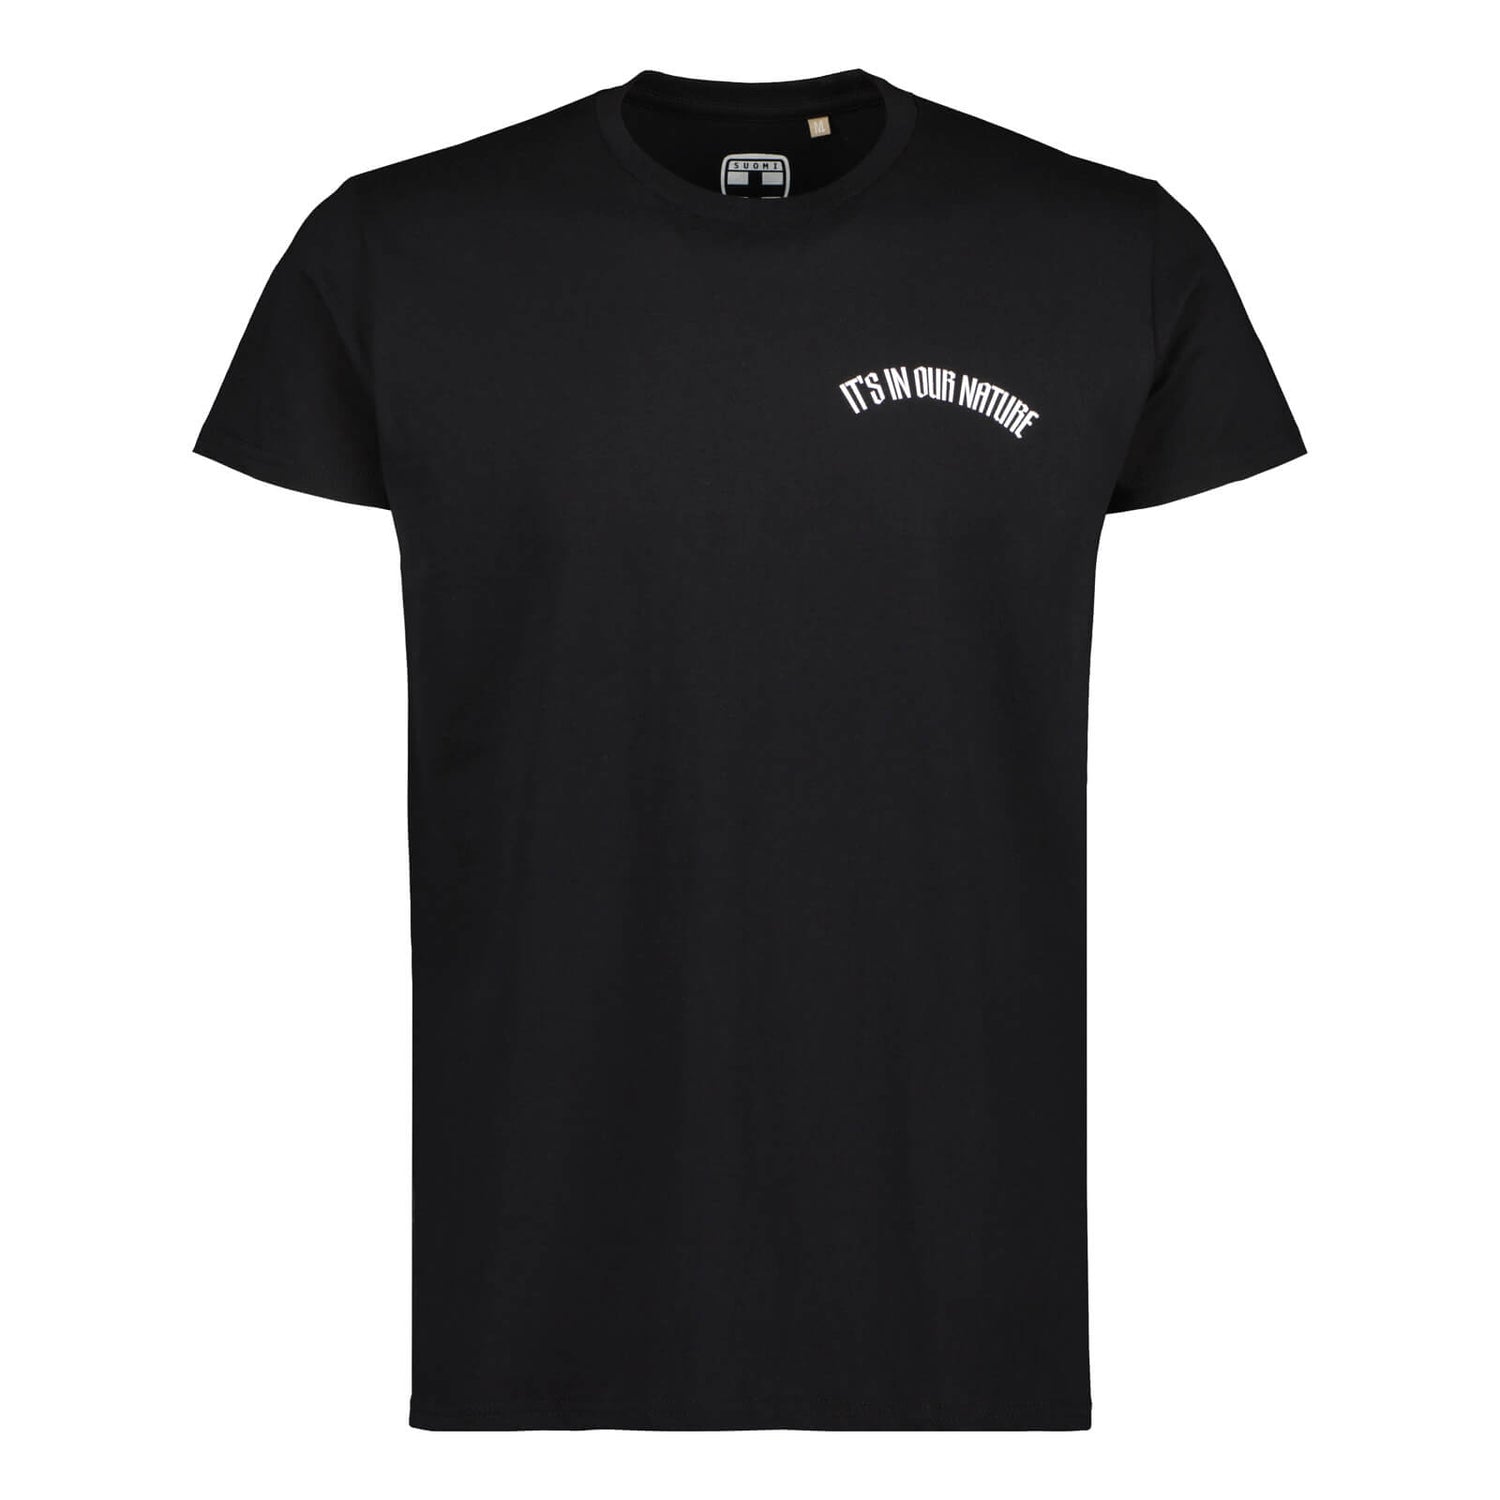 It's In Our Nature organic cotton t-shirt, Black